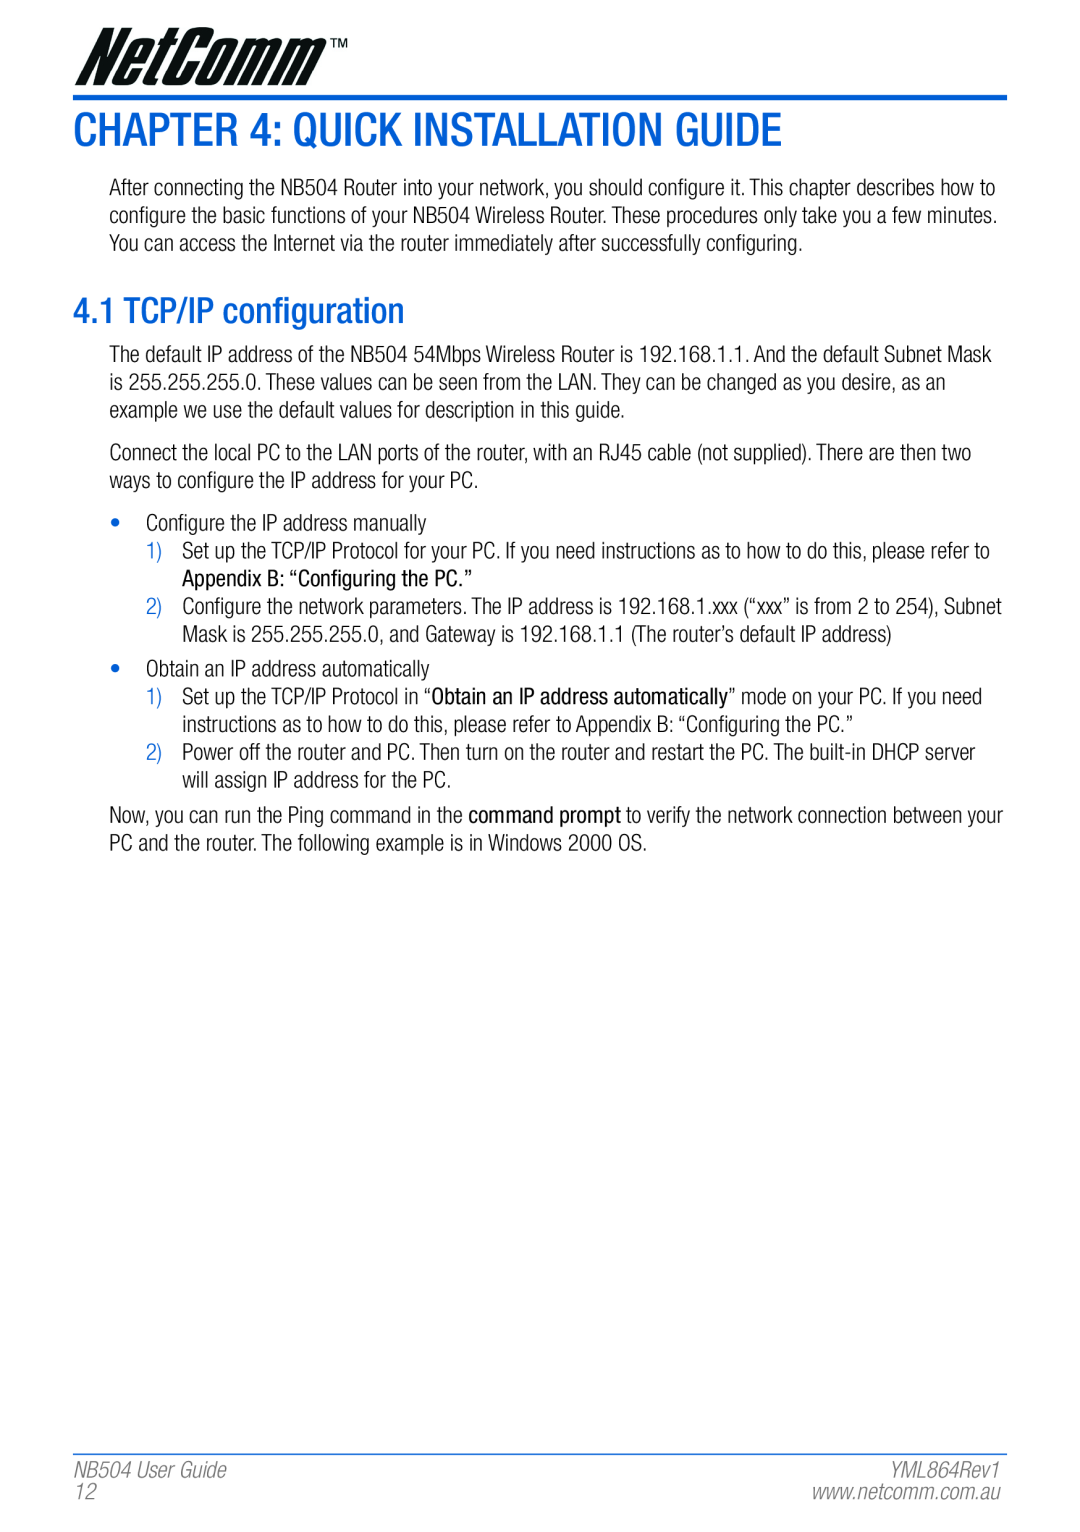 NetComm manual Quick Installation Guide, 4.1 TCP/IP configuration, NB504 User Guide 